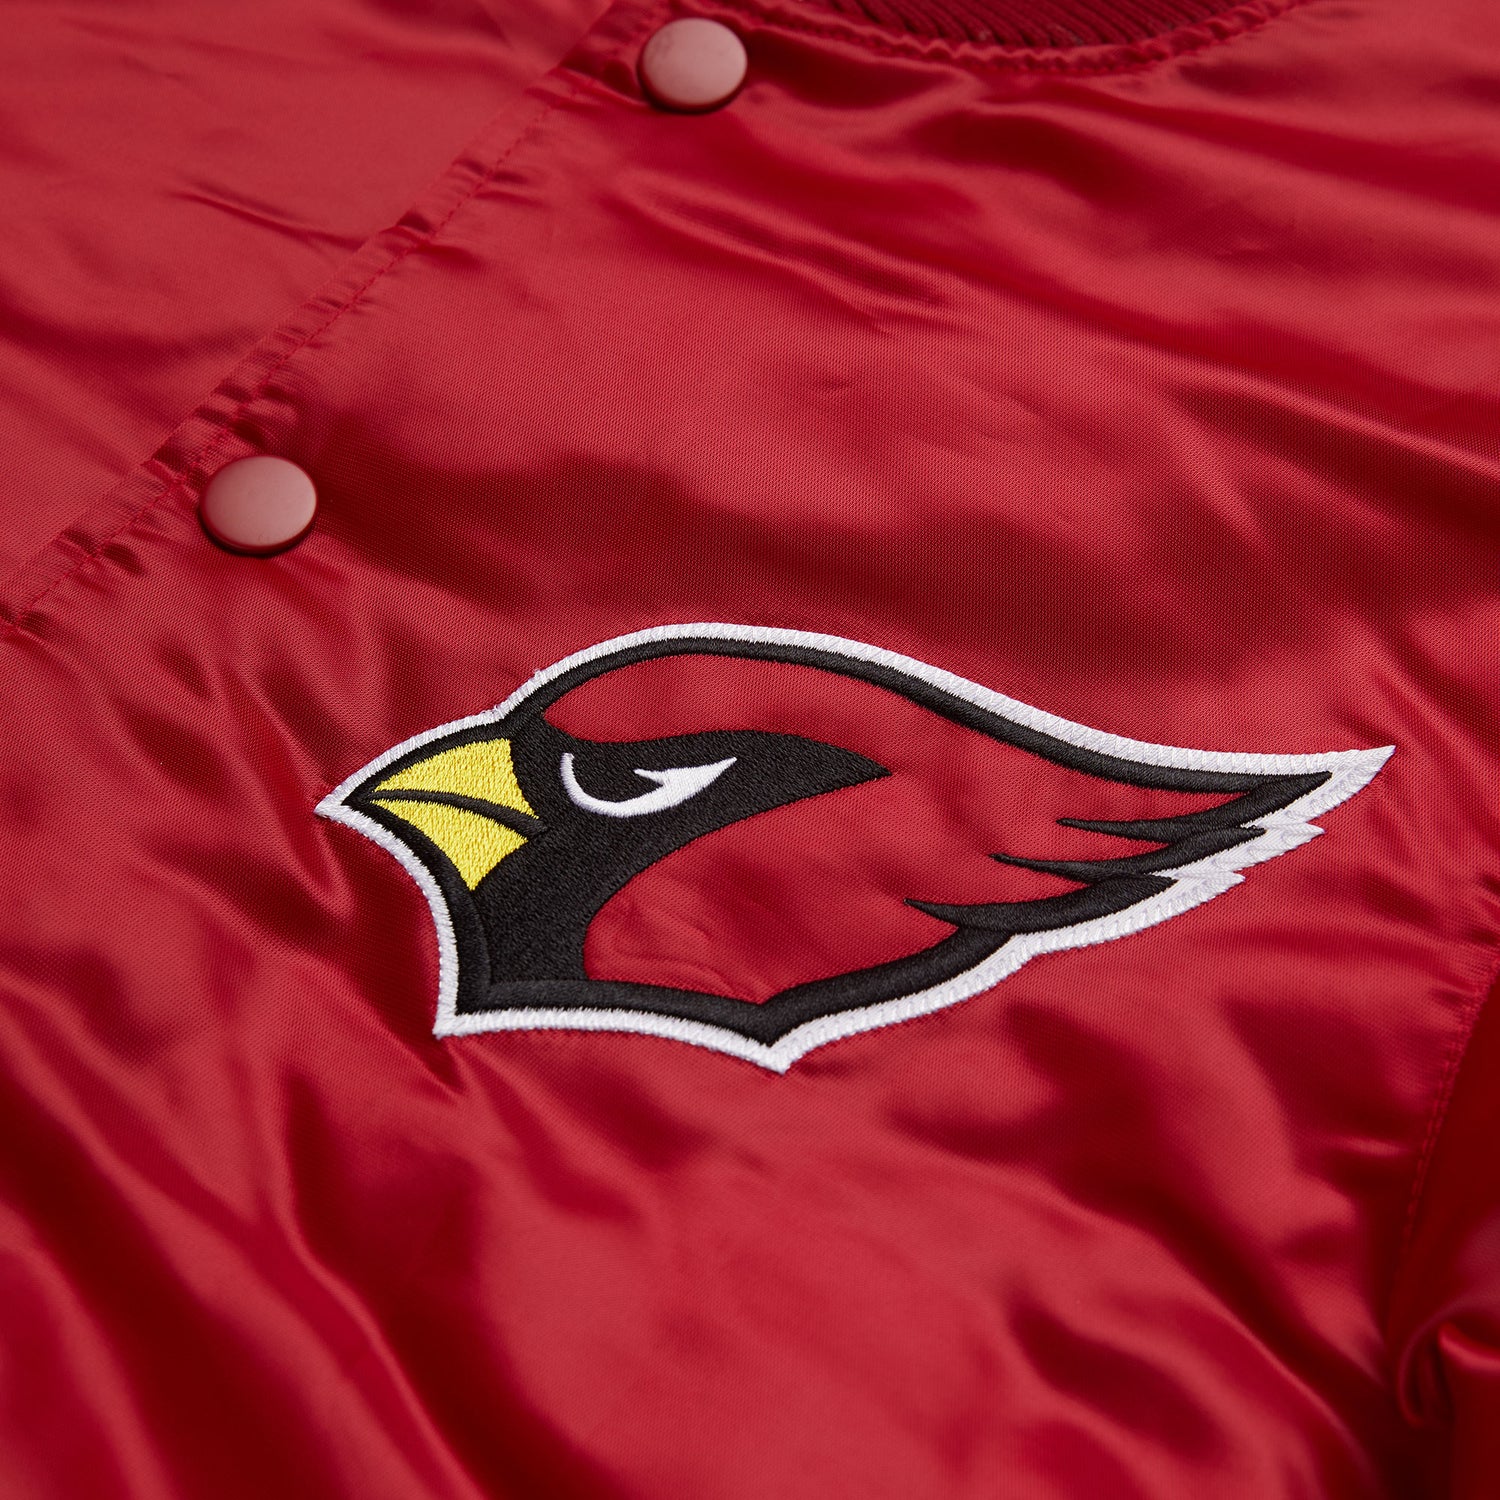 Satin Commemorative St. Louis Cardinals Red and White Jacket